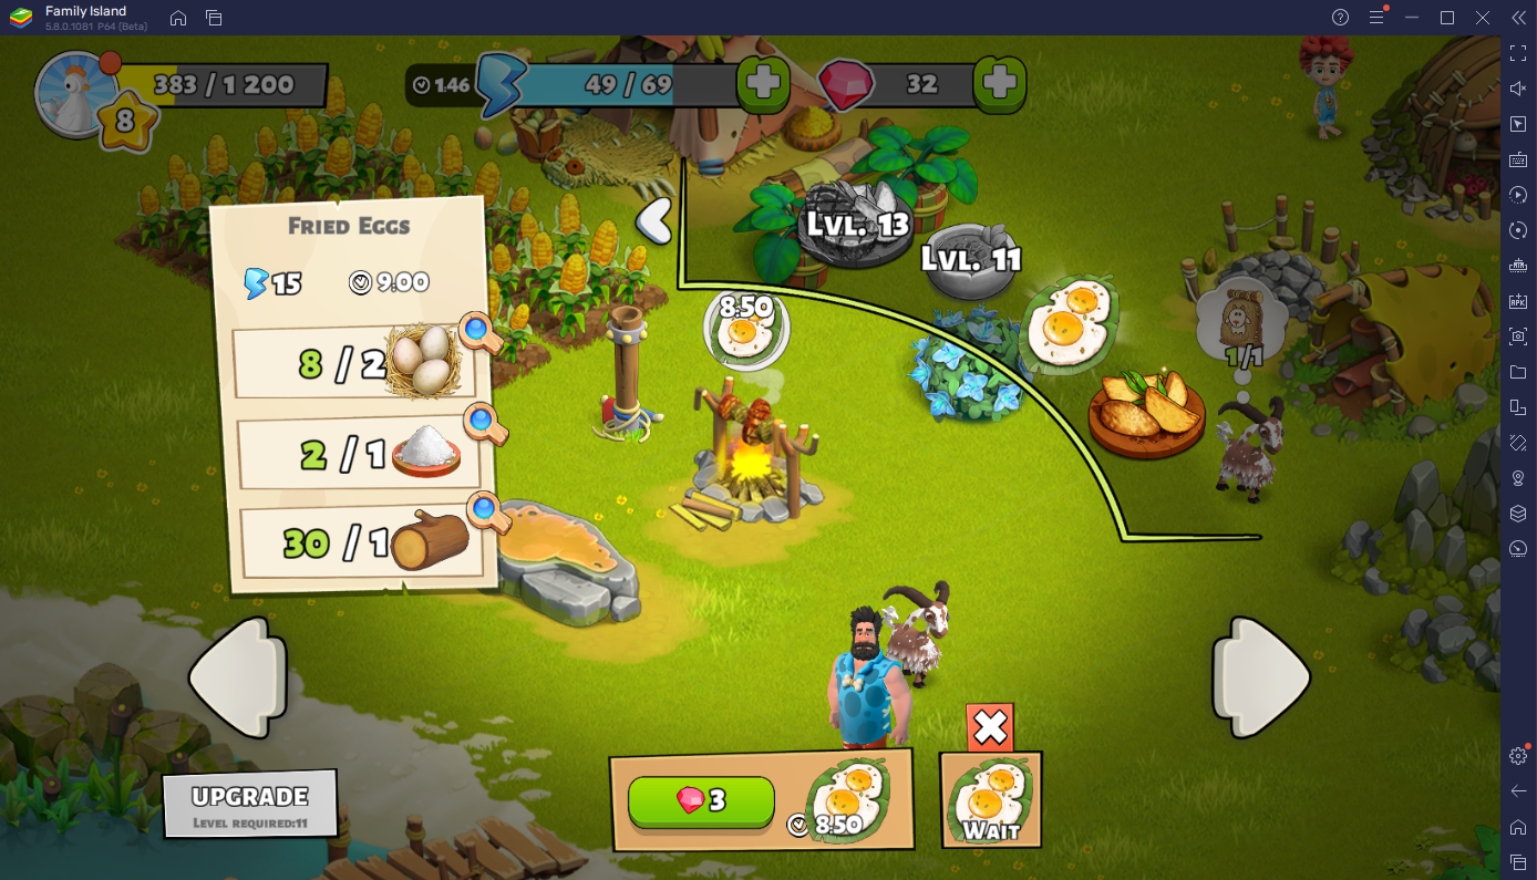 Tips & Tricks to Playing Family Island — Farming game